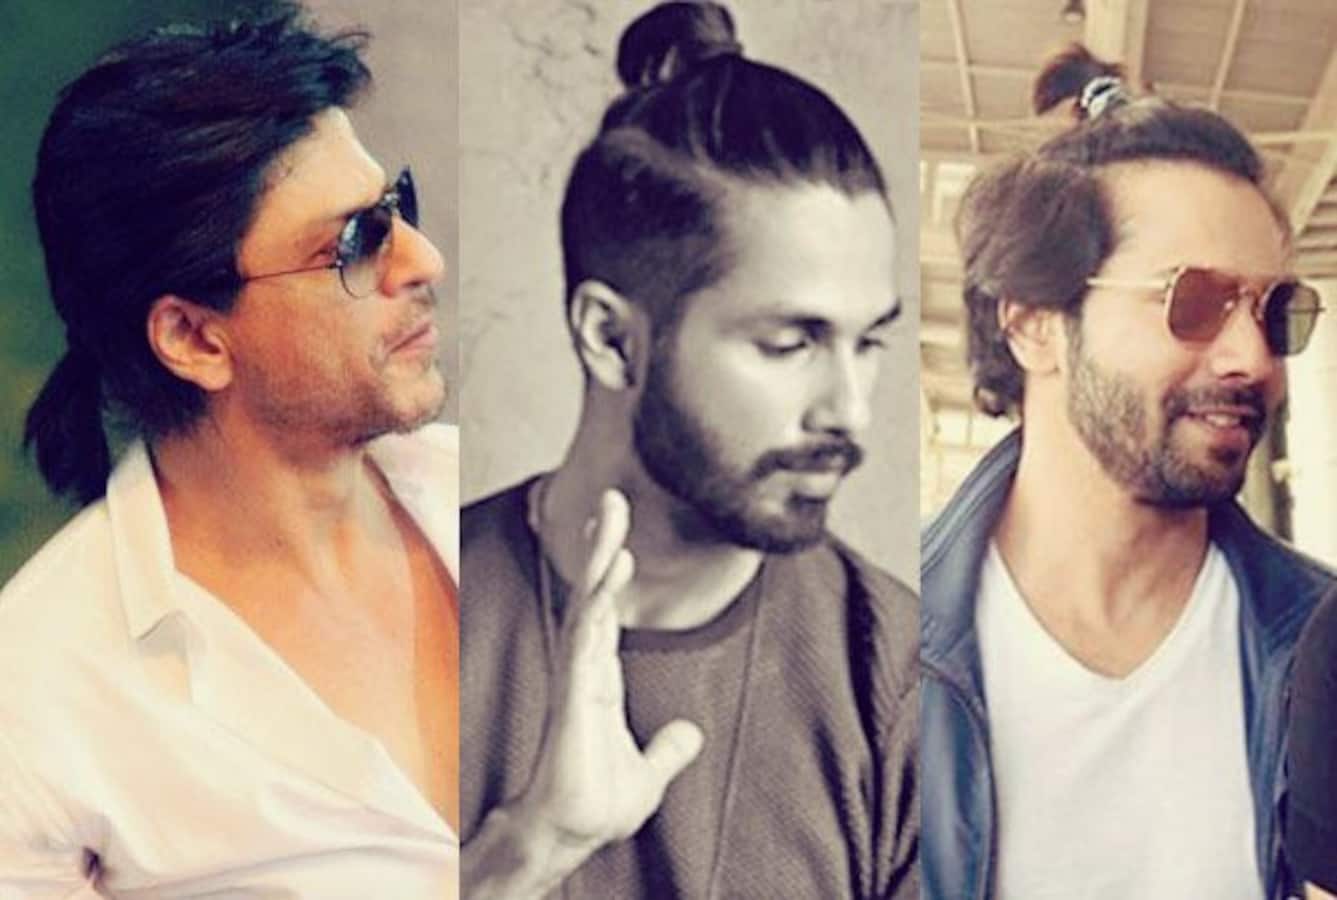 Shah Rukh Khan, Shahid Kapoor, Varun Dhawan prove that the man bun will  never go out of style - Bollywood News & Gossip, Movie Reviews, Trailers &  Videos at 